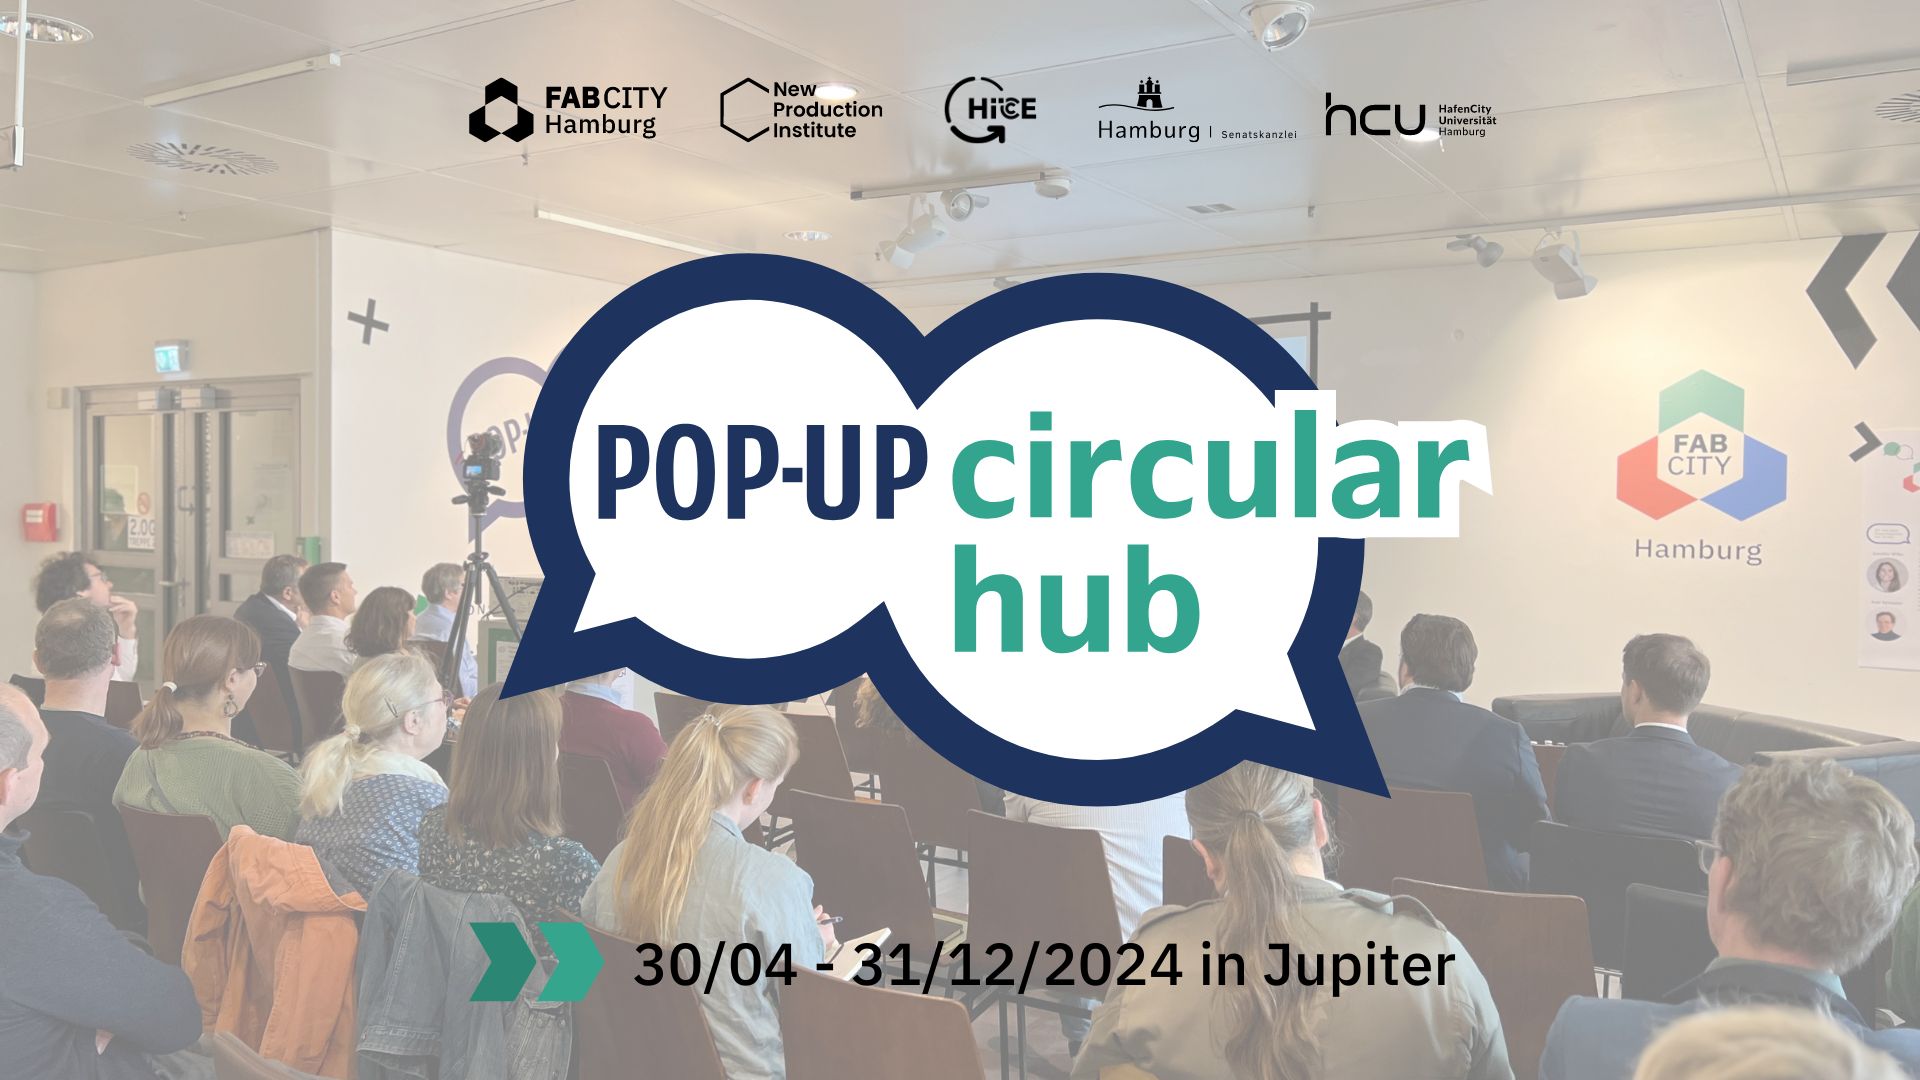 You are currently viewing Circular economy in the heart of Hamburg! Re-opening of the pop-up Circular Hub 2.0 at Jupiter